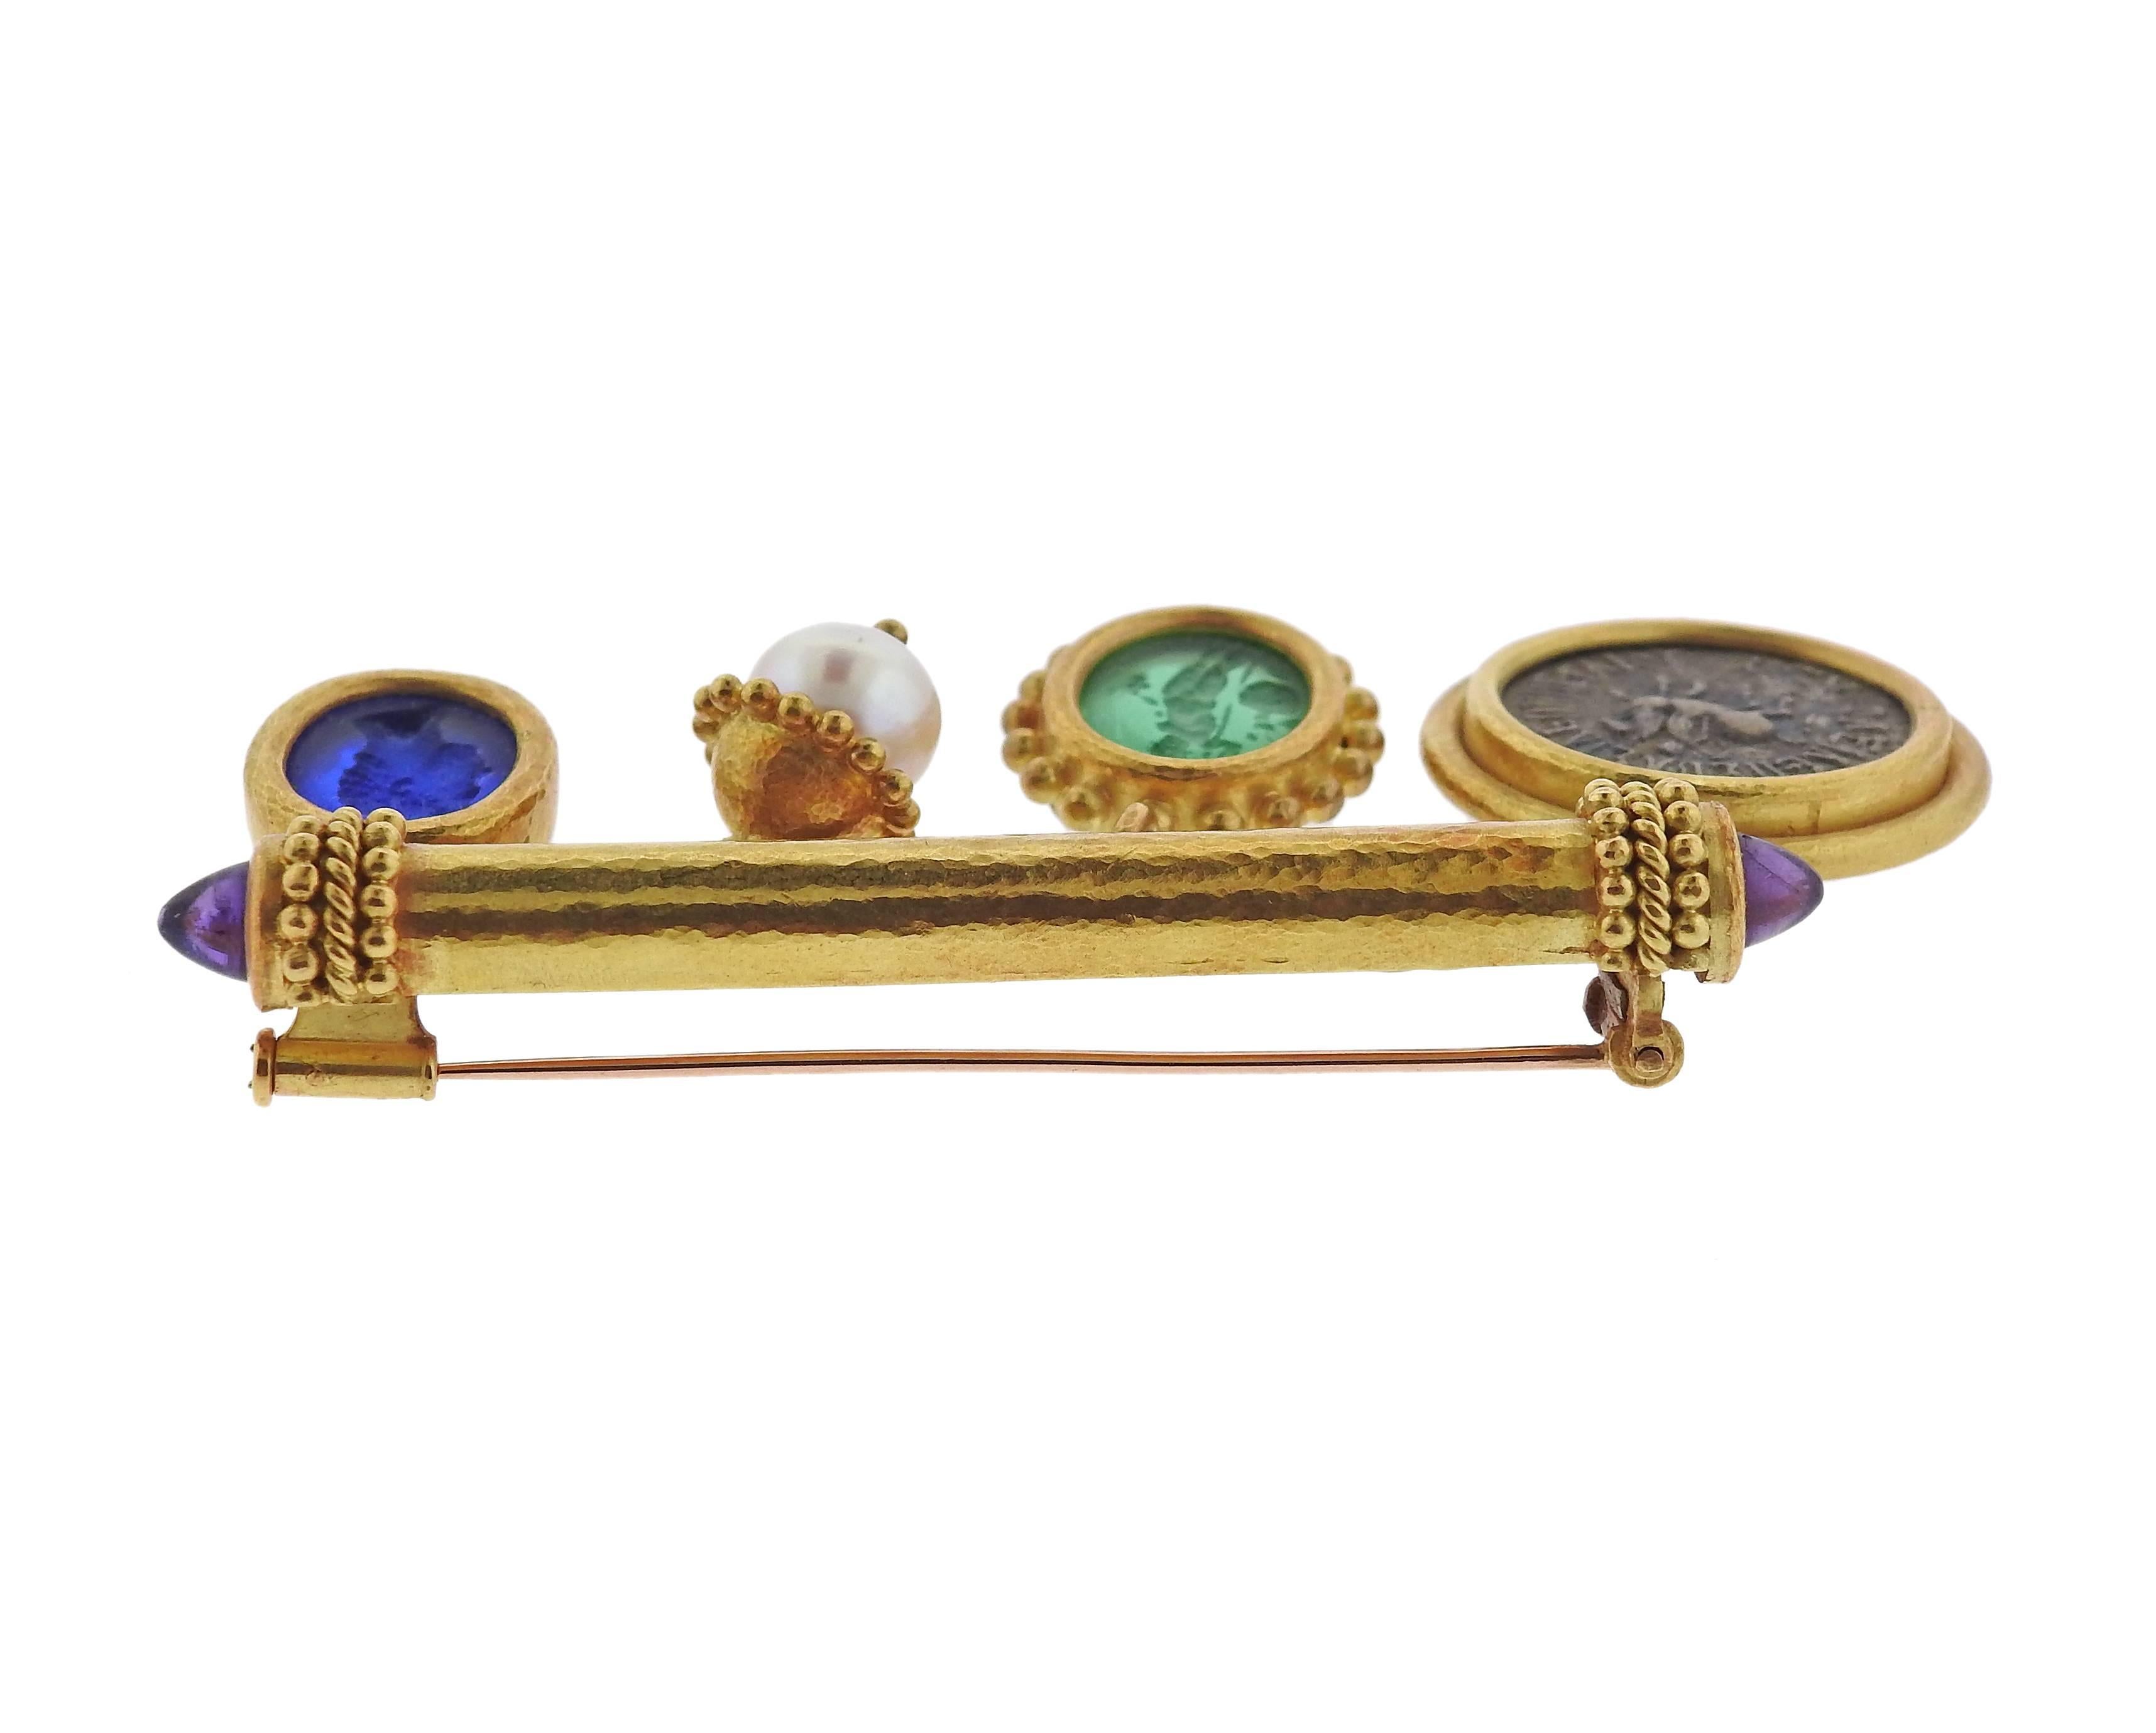 An 18k yellow gold brooch, crafted by Elizabeth Locke, set with charms, decorated with Venetian glass intaglio, ancient coin, pearl and two amethyst cabochons. Brooch is 65mm x 43mm long, weighs 38.7 grams. Marked: E mark, 18k. 